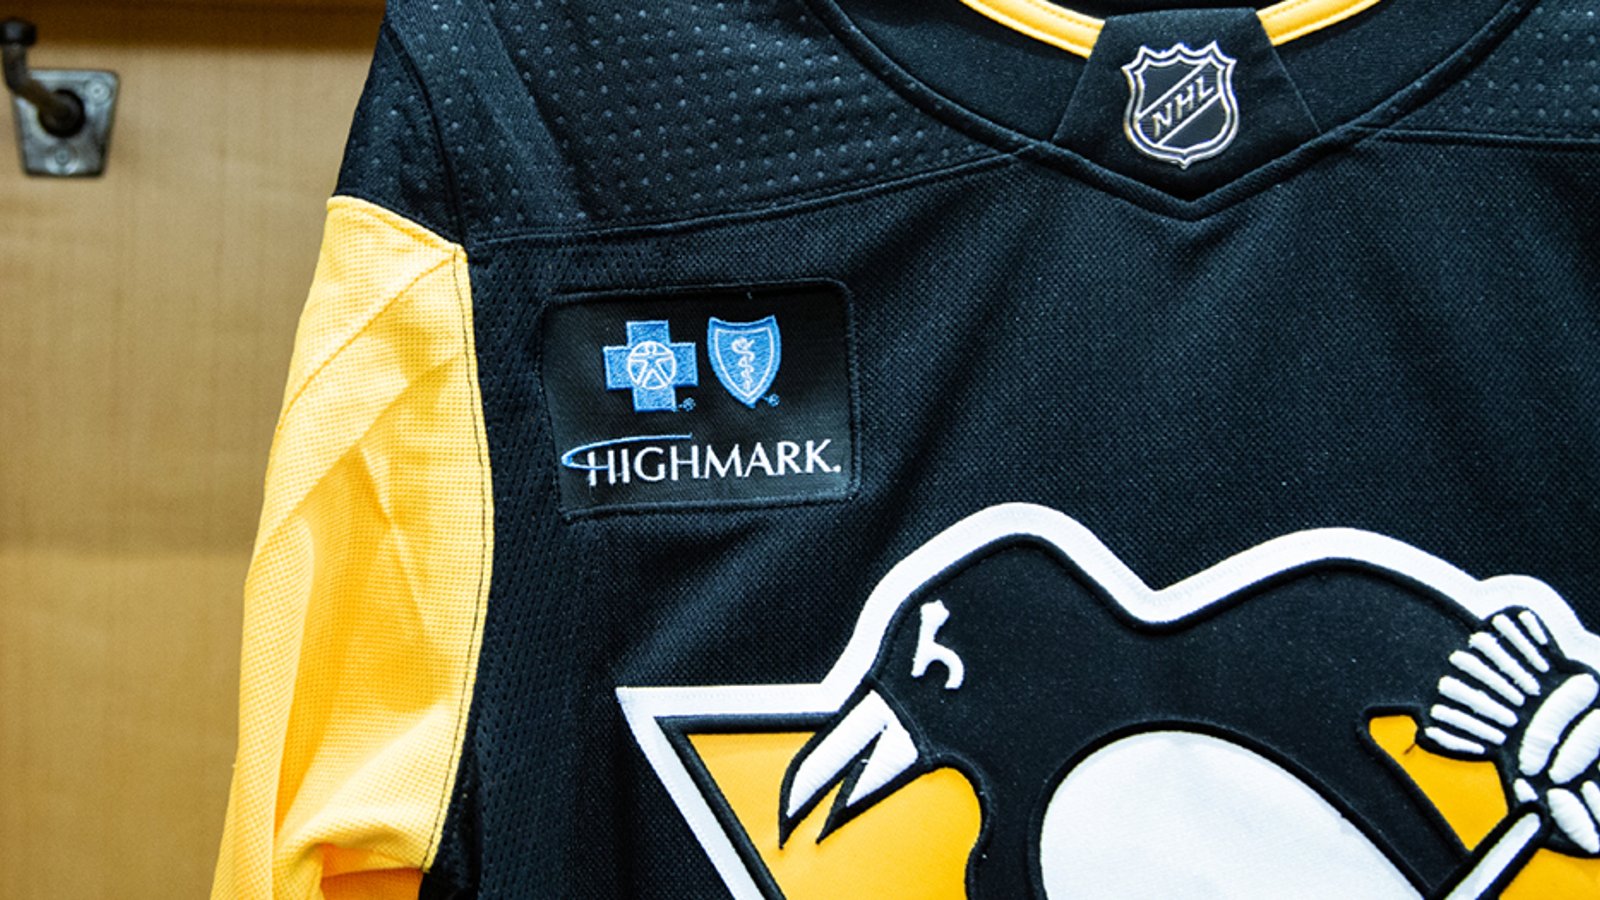 First look at which NHL teams will feature ads on their jerseys next season